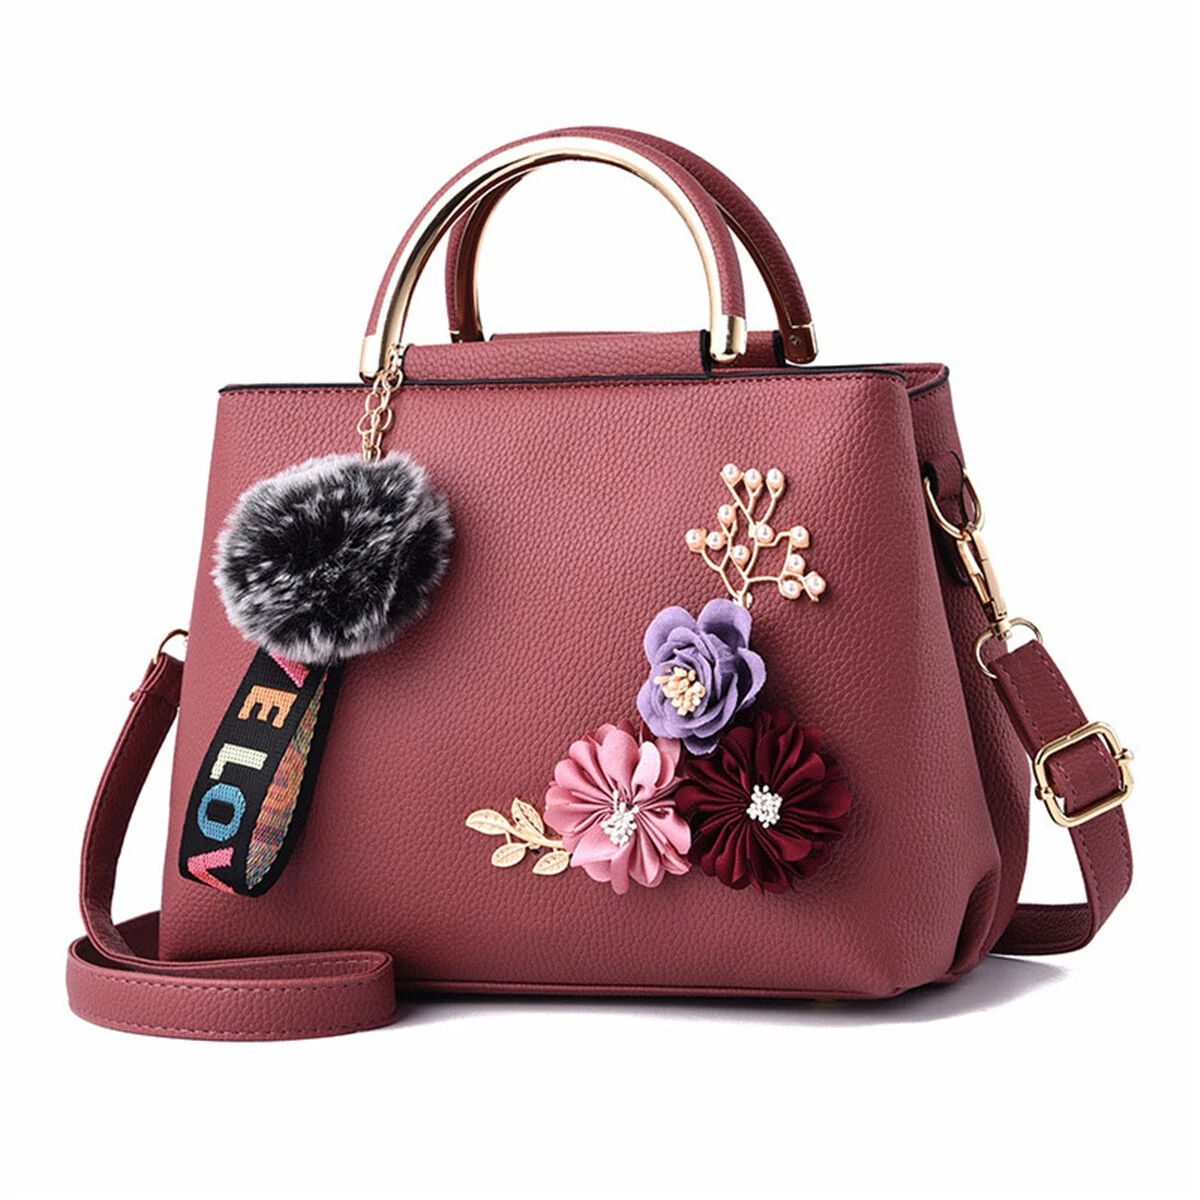 Womens purses and handbag shoulder bags ladies designer top handle satchel tote bag with ribbons and flower decoration